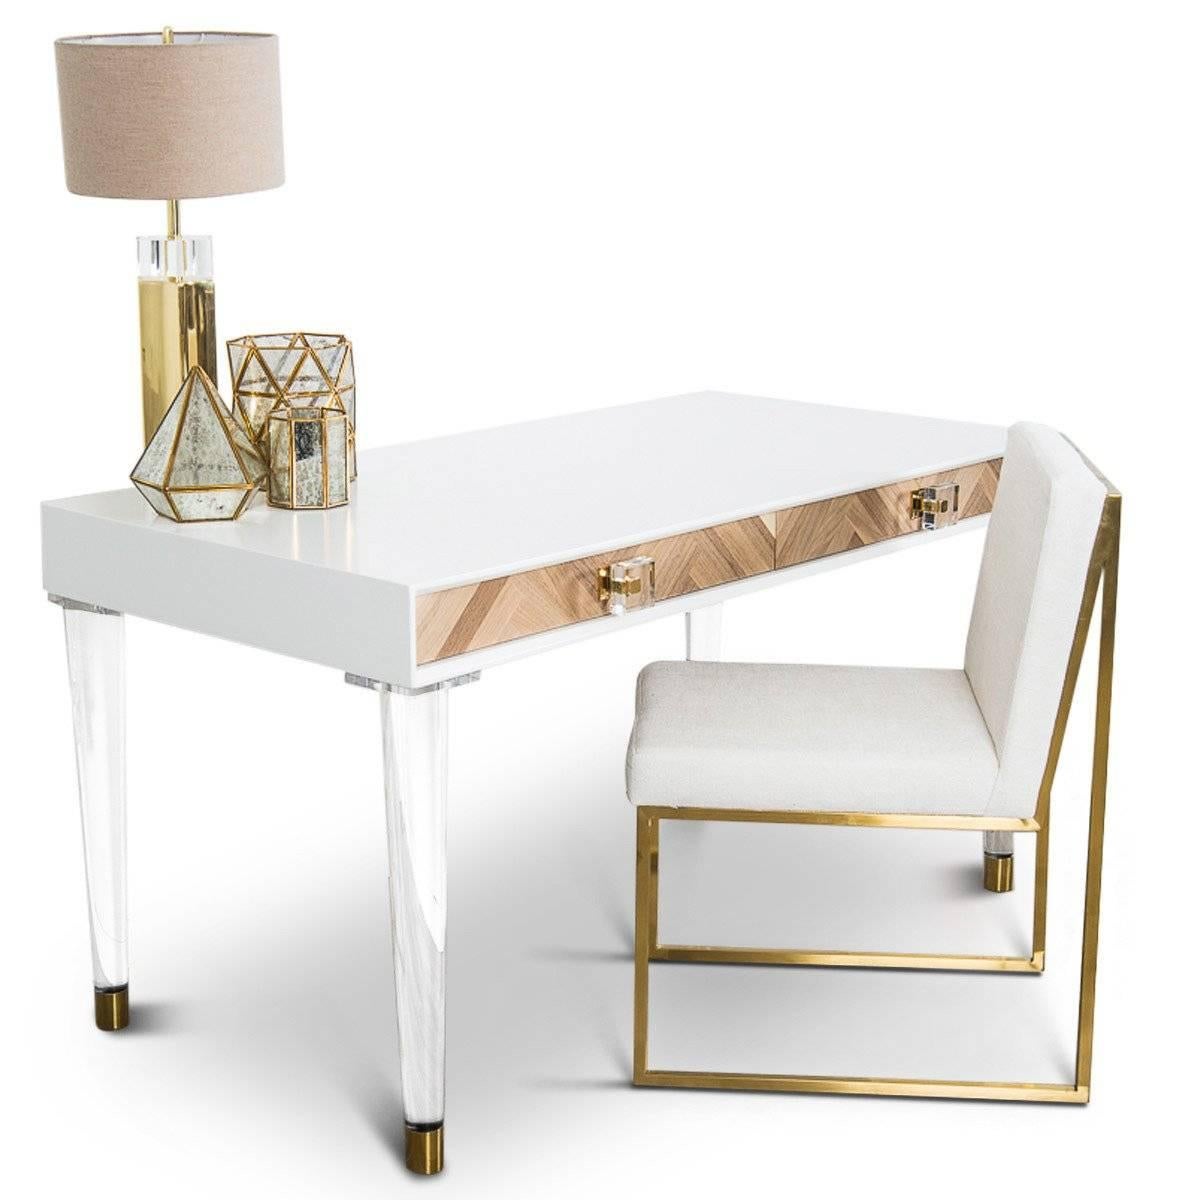 Freshen up the patterns in your office with our gorgeous Amalfi Desk finished with a matte white case and Lucite knobs. The natural patterns of the walnut wood show in the beautifully crafted drawers. This sits on top of our gorgeous new Lucite cone